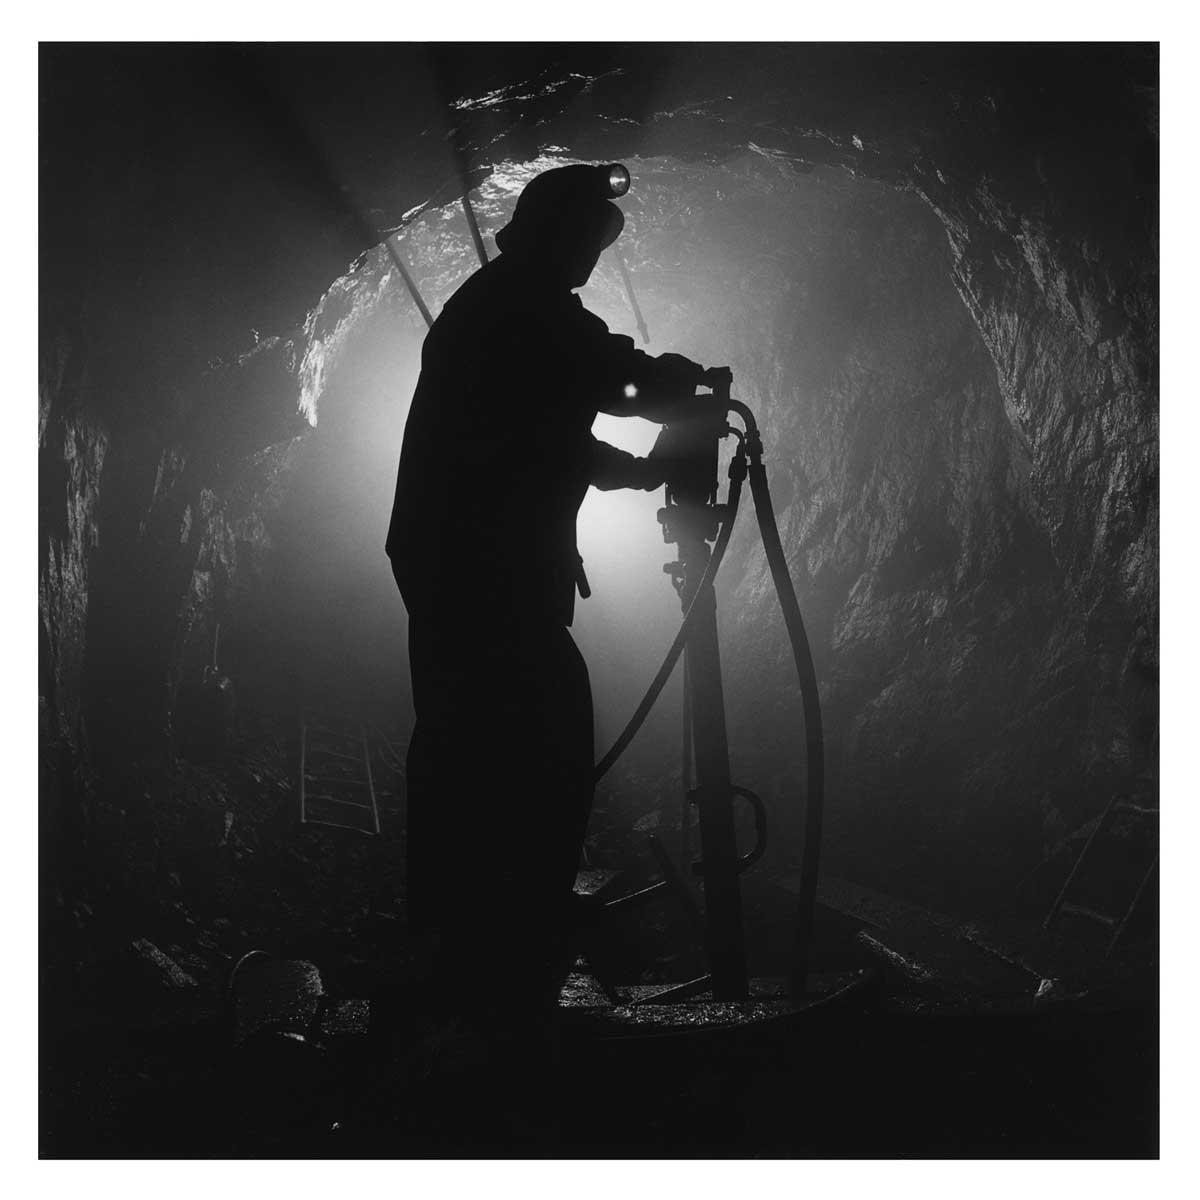 A black and white photo of a backlit miner working underground.